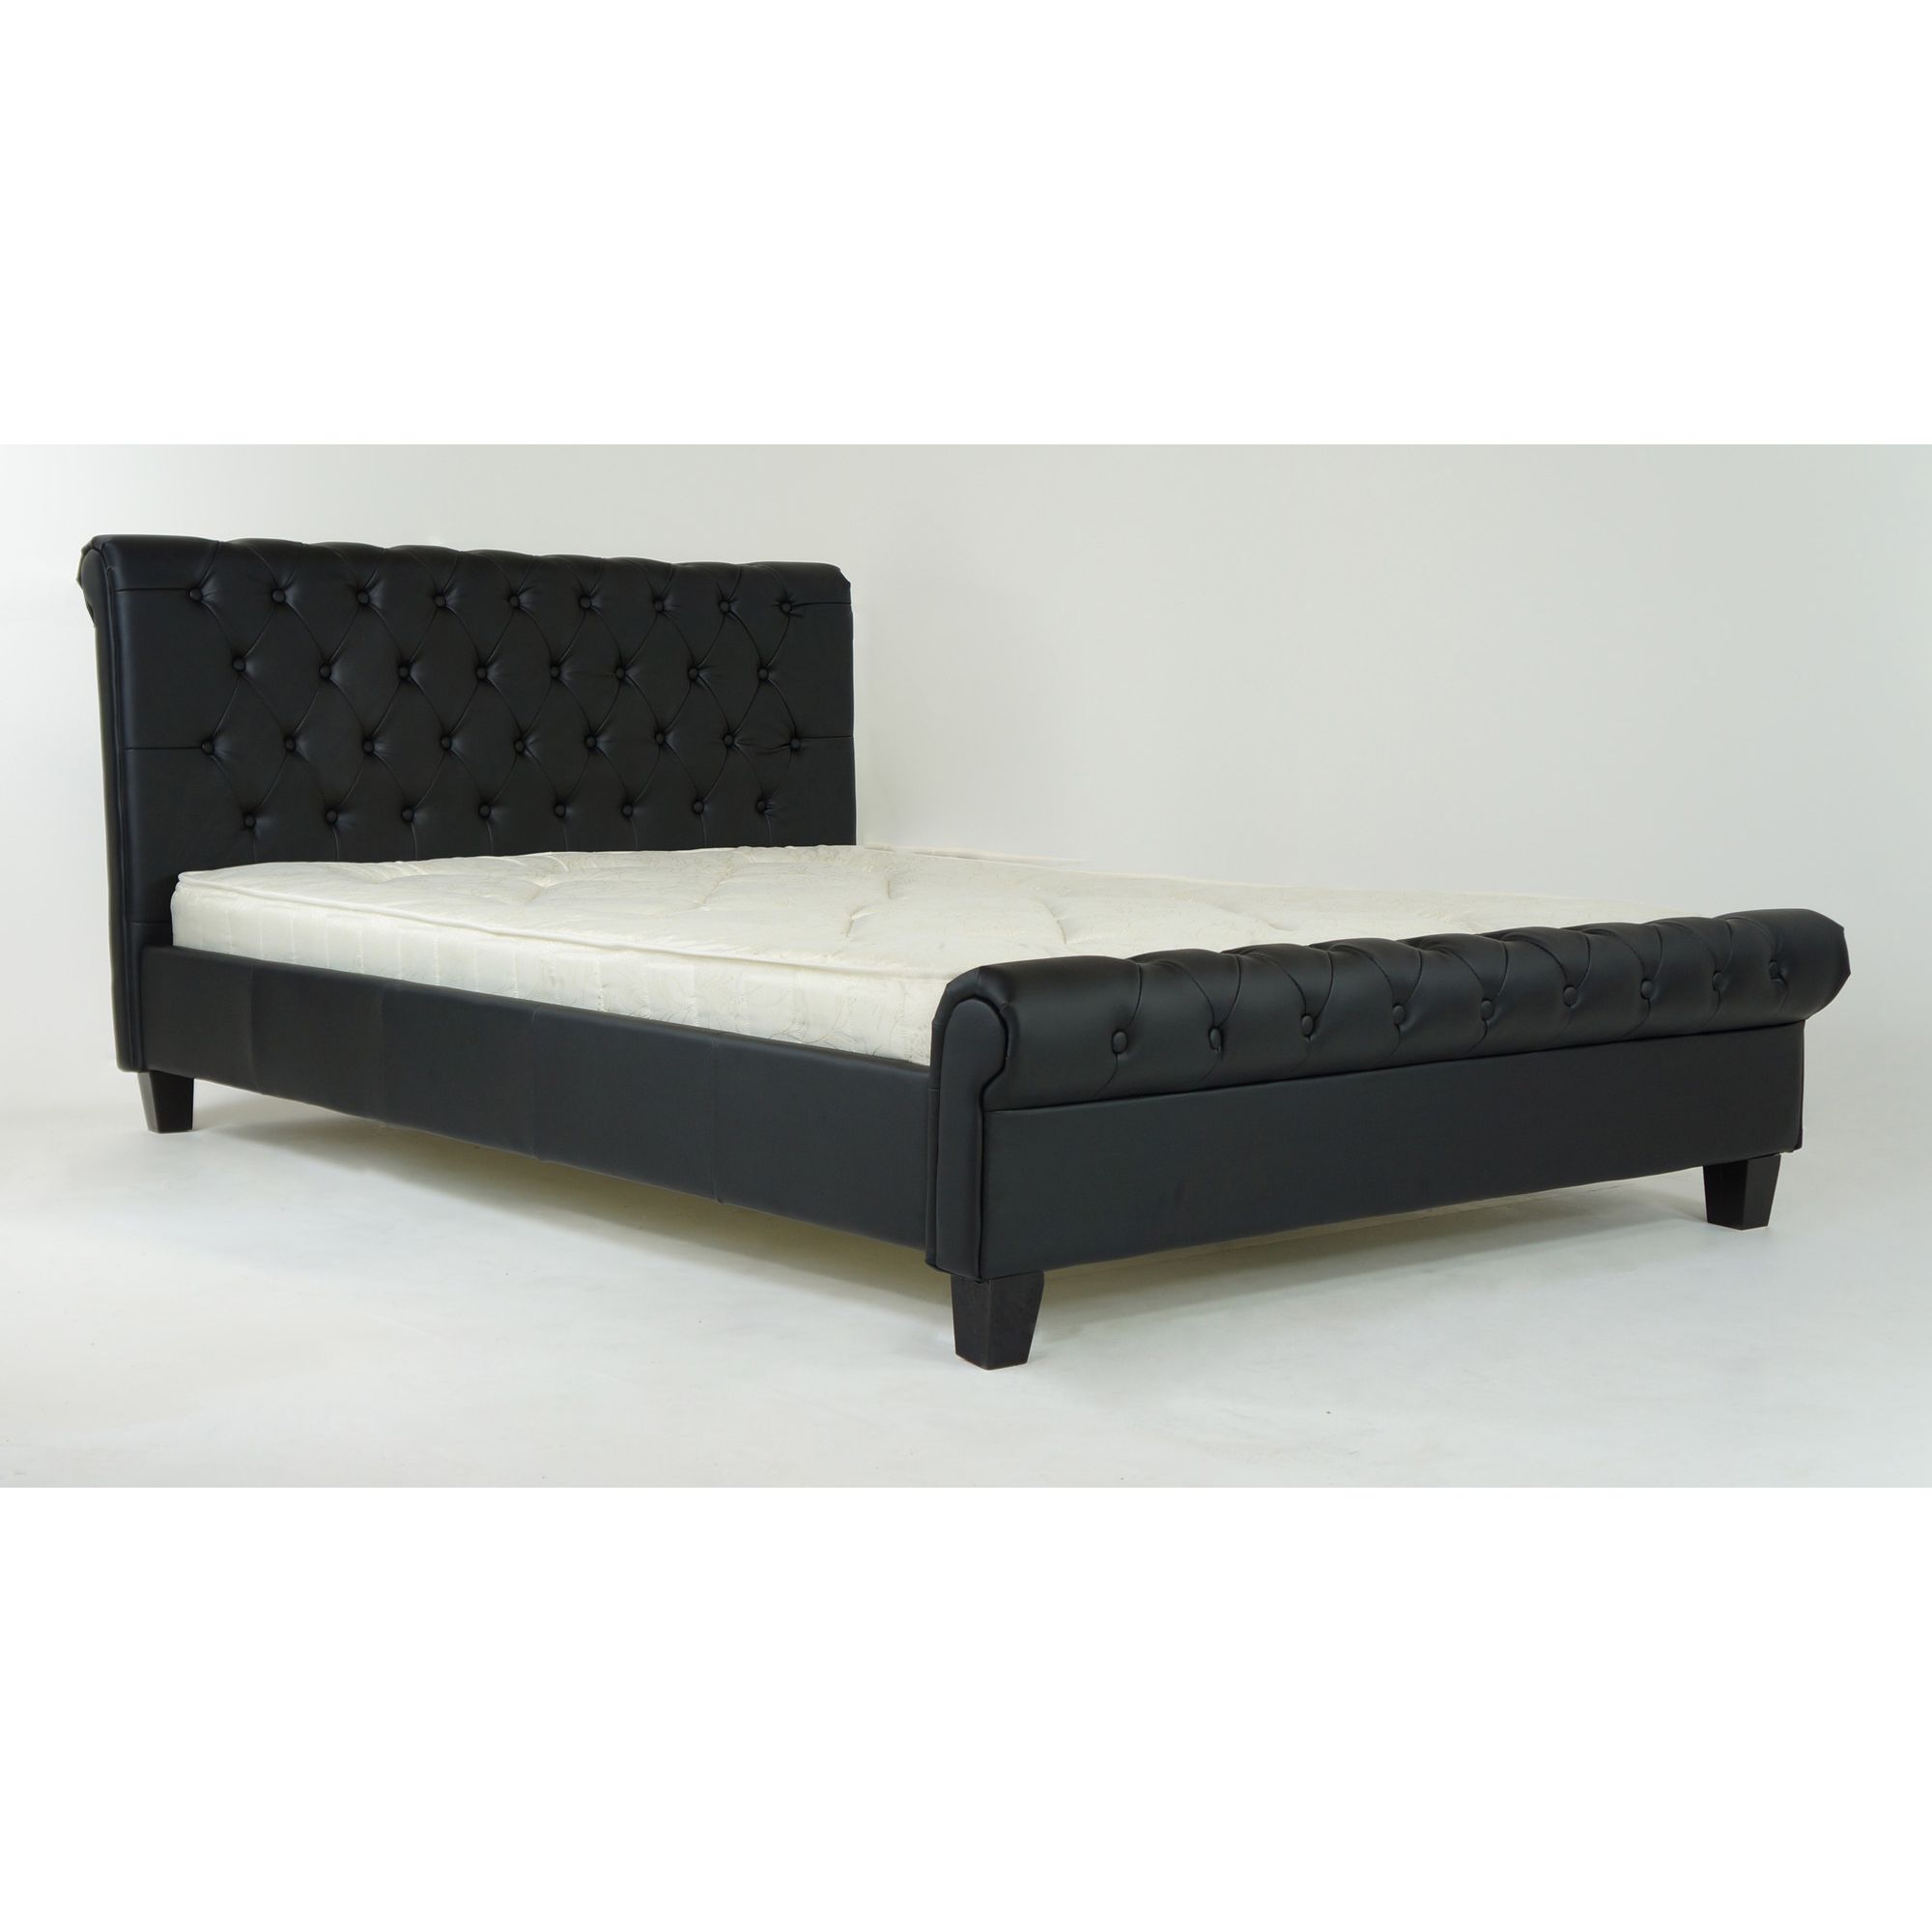 Alpha furniture Chesterfield Real Leather Bed, Double, Black at Tesco Direct